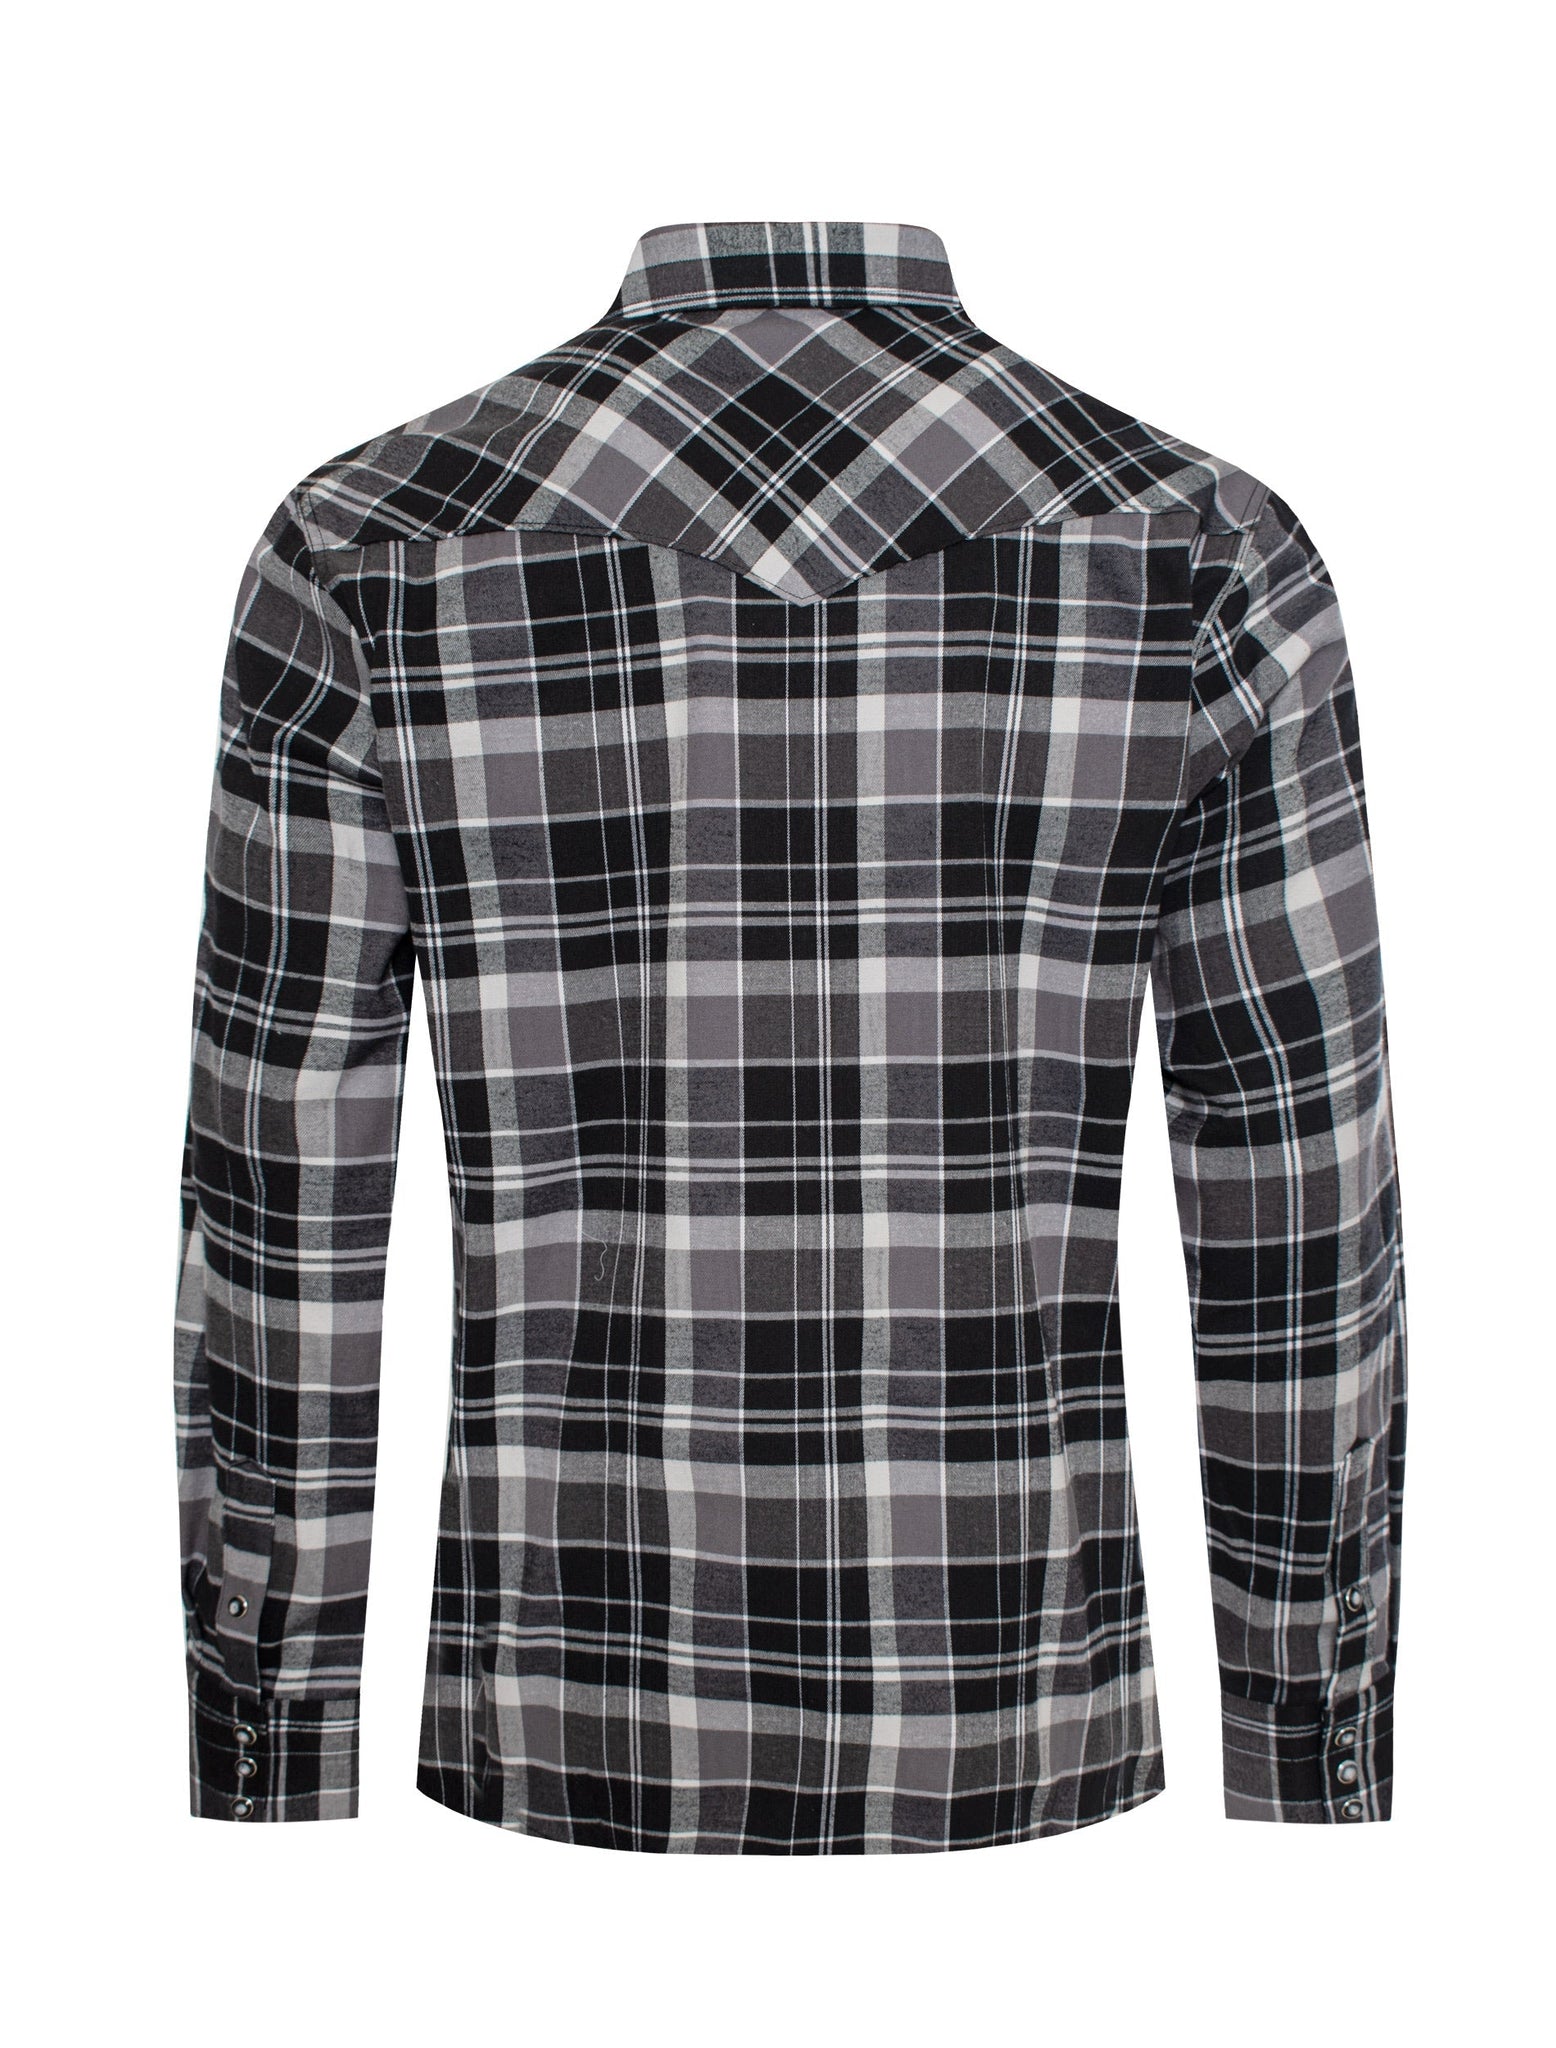 Men's Western Flannel Shirts With Snap Buttons -FLS300-309